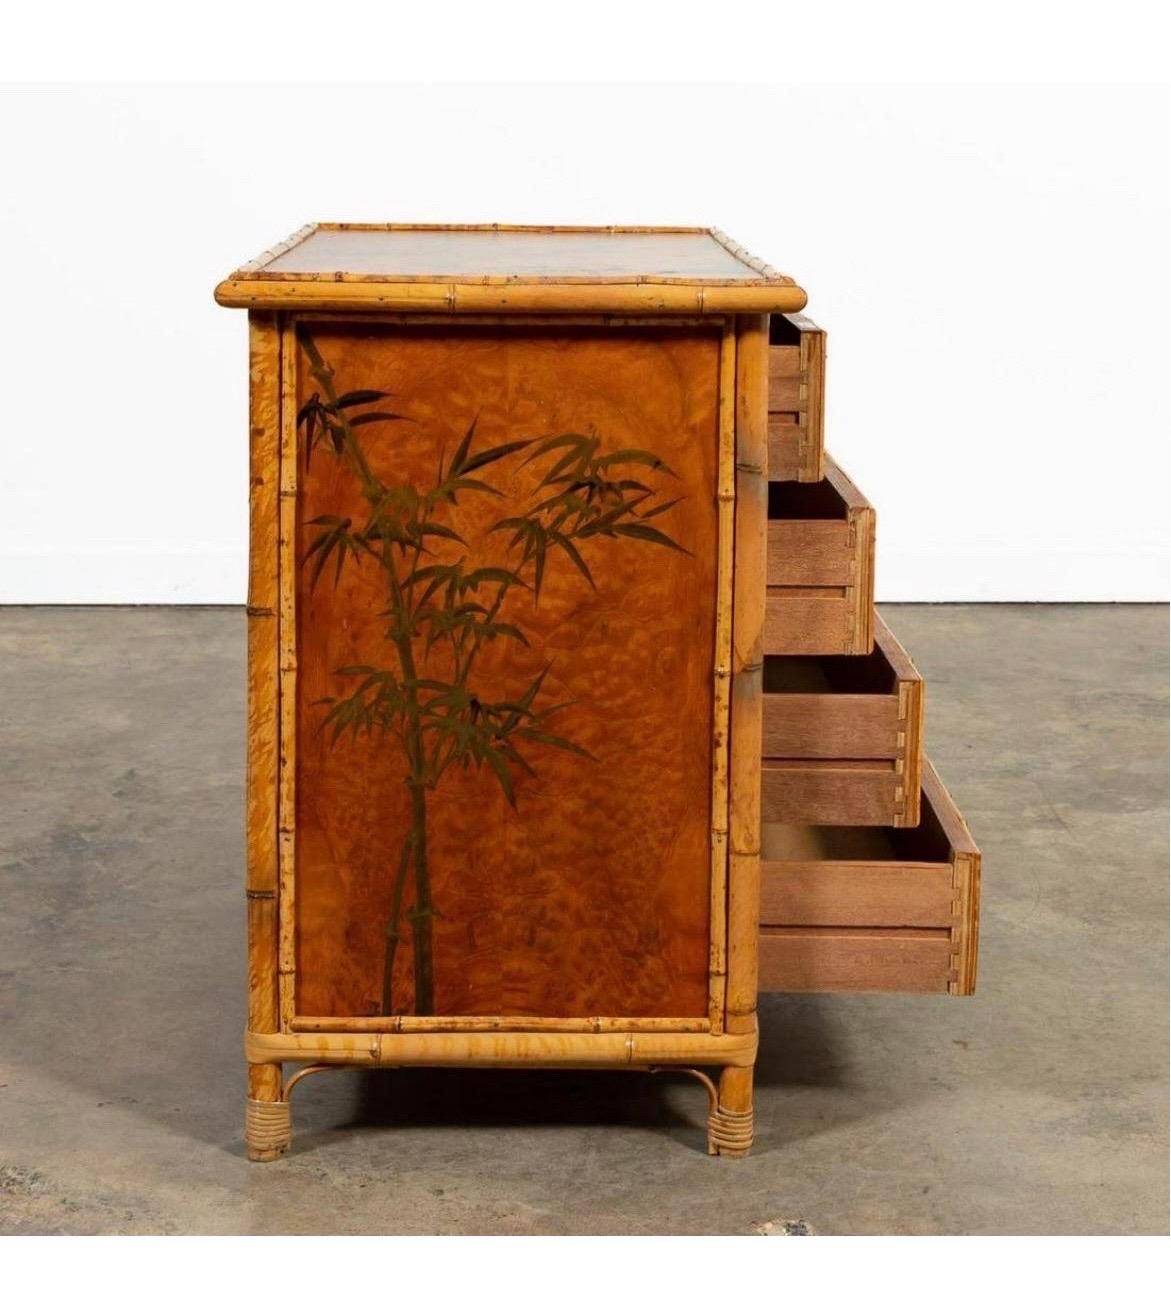 English or American, 20th century. Aesthetic movement-style bamboo four-drawer chest with Asian-style landscape scenes. Unmarked.